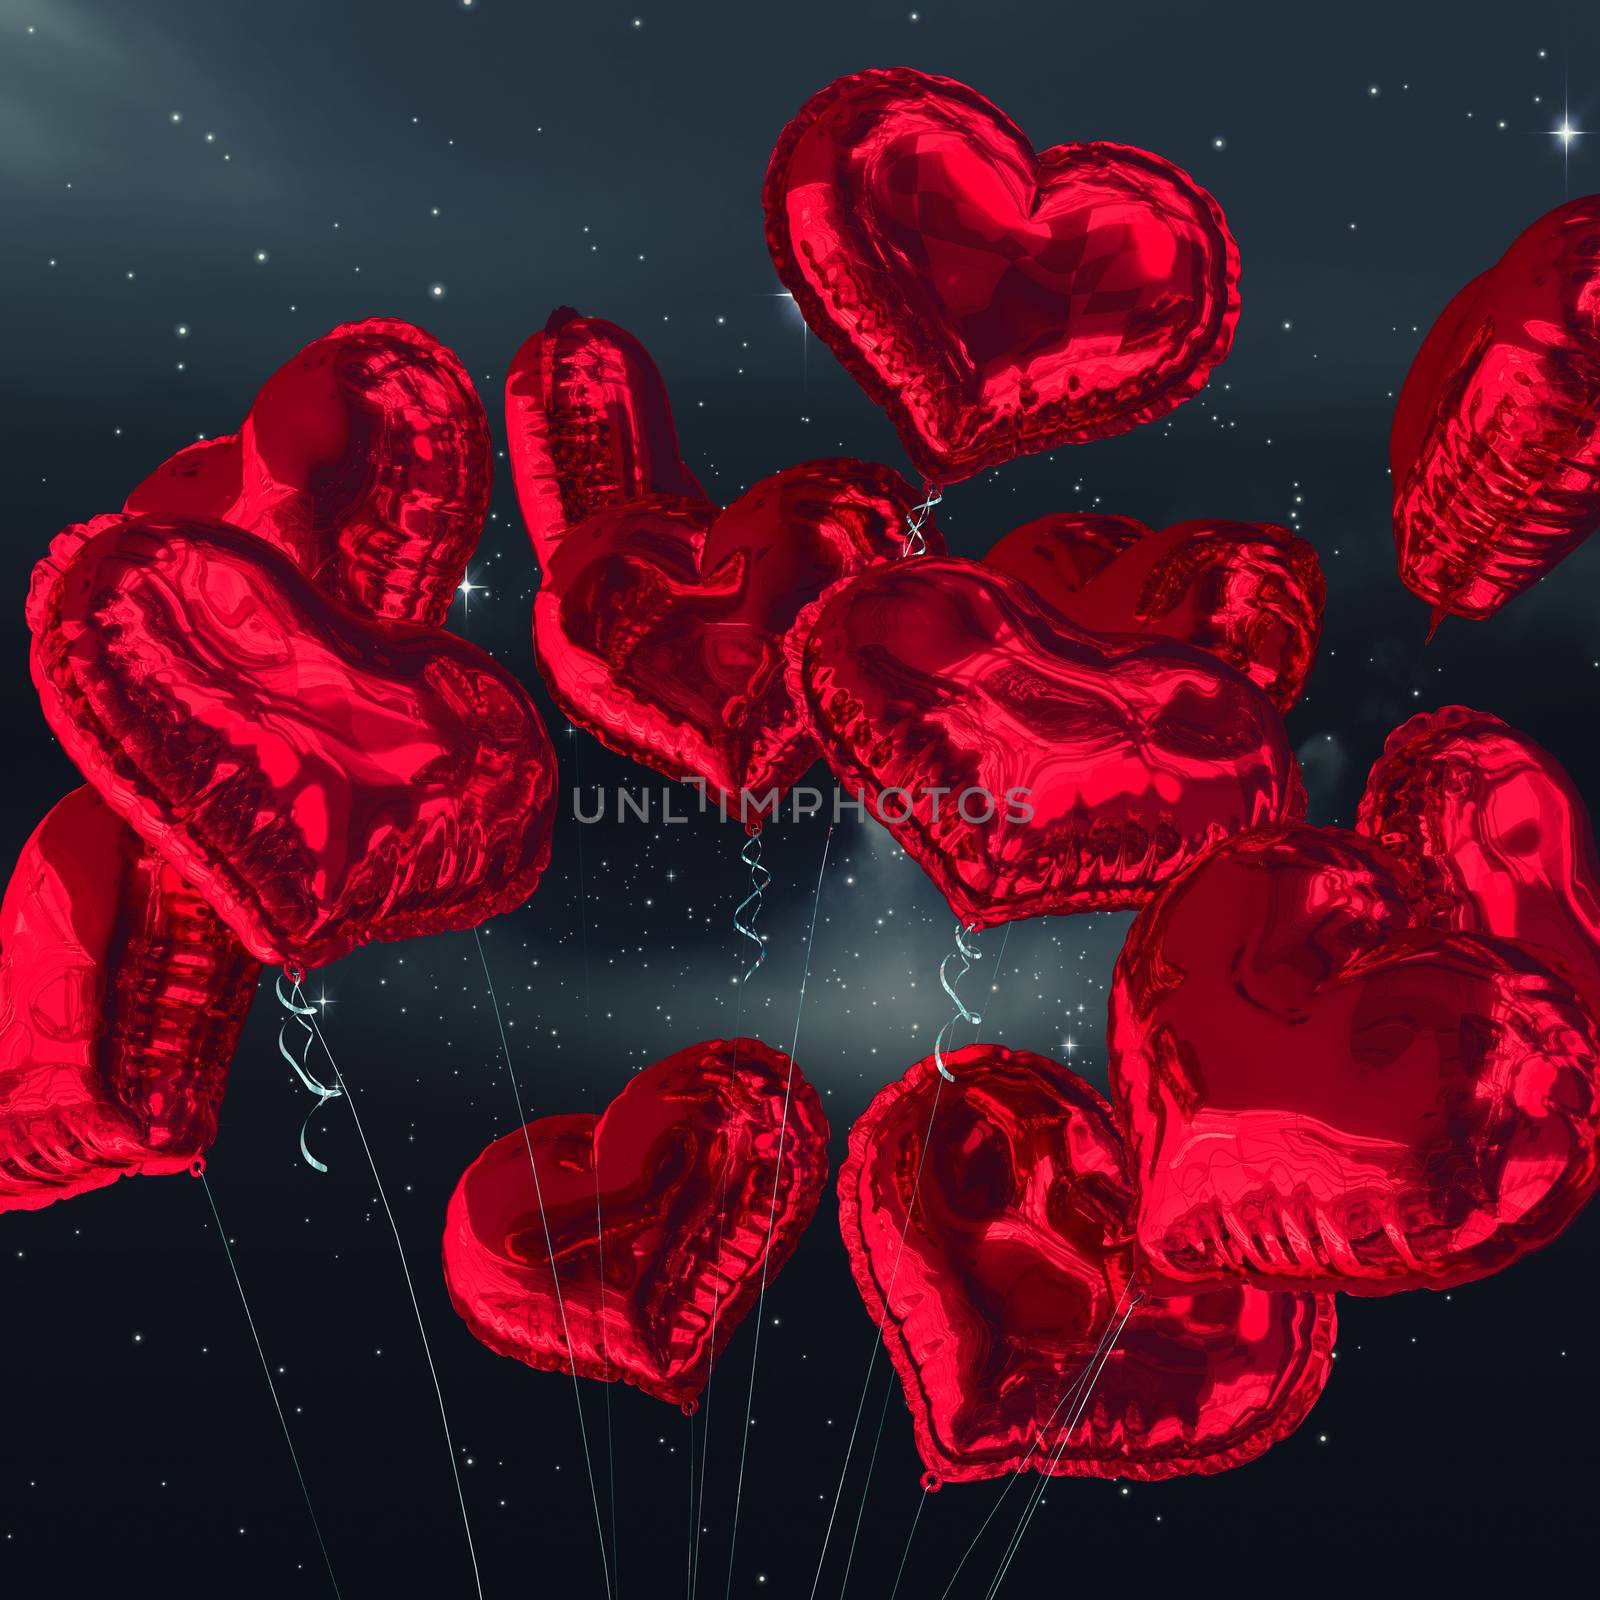 Heart balloons against stars twinkling in night sky